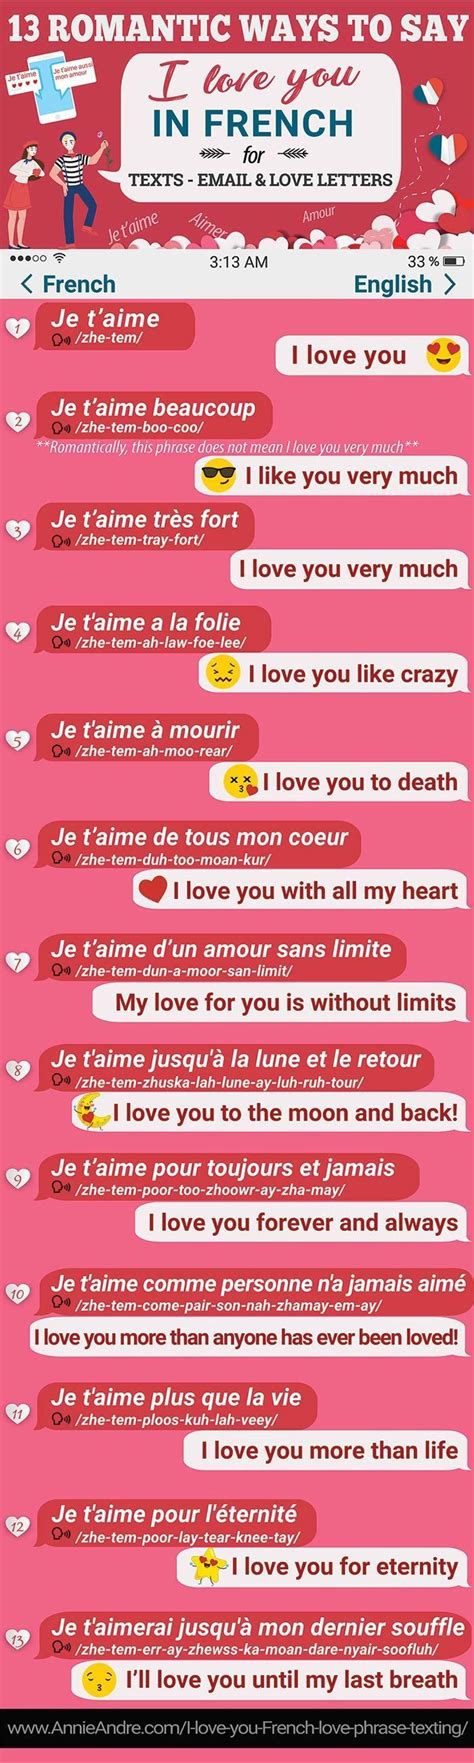 13 Super Romantic French Phrases To Say I Love you In French | Romantic french phrases, French ...